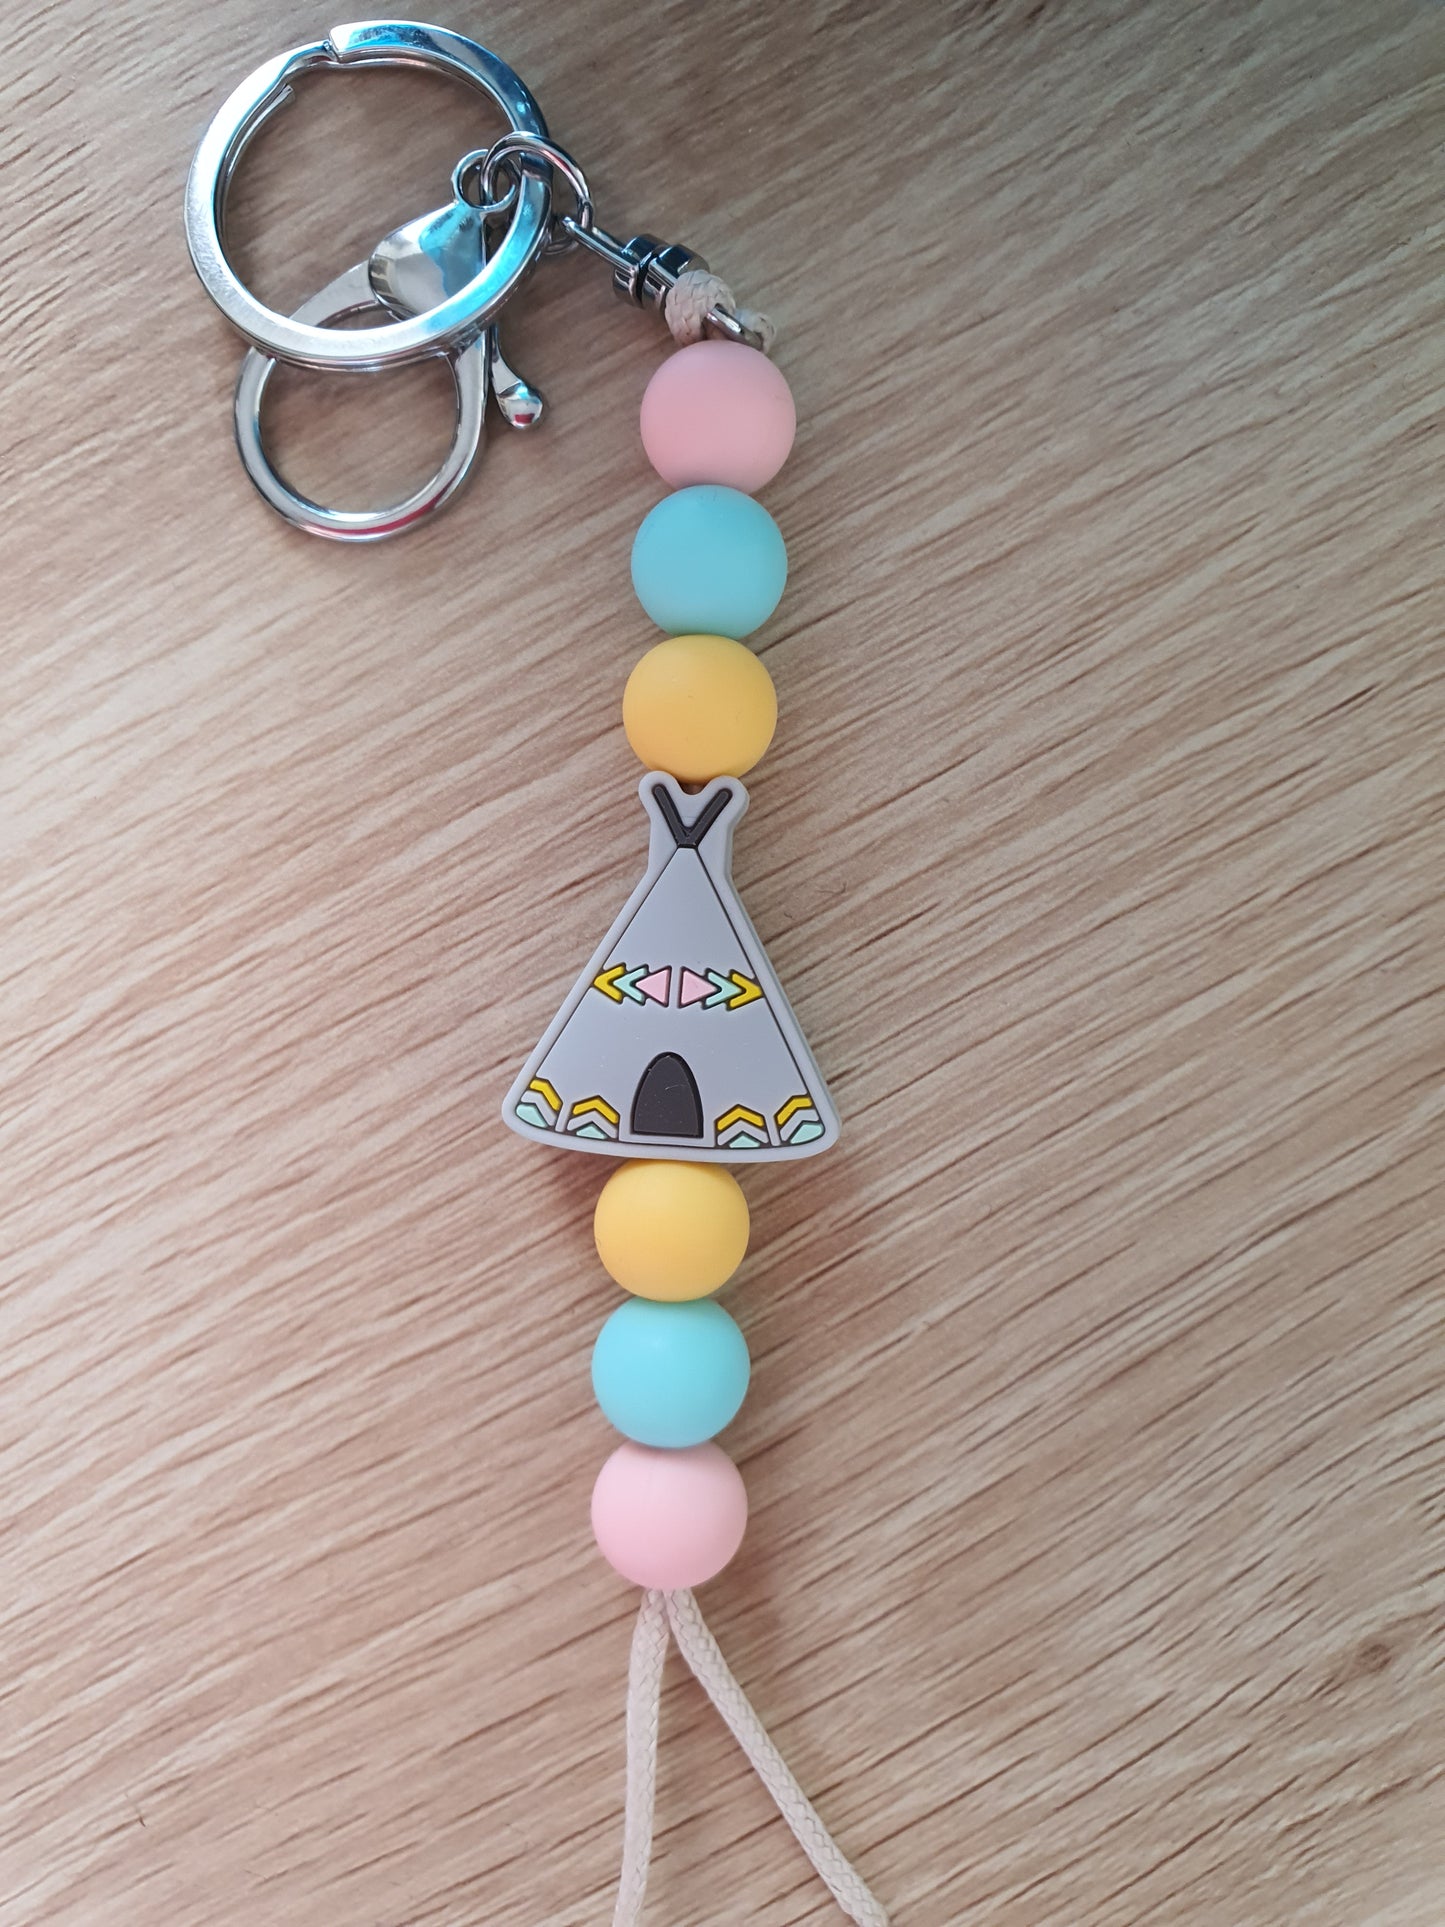 Tipi Tent / Teepee Tent / Indian Tent Silicone Bead | Handmade Keyring or Lanyard - PeppaTree Design Store